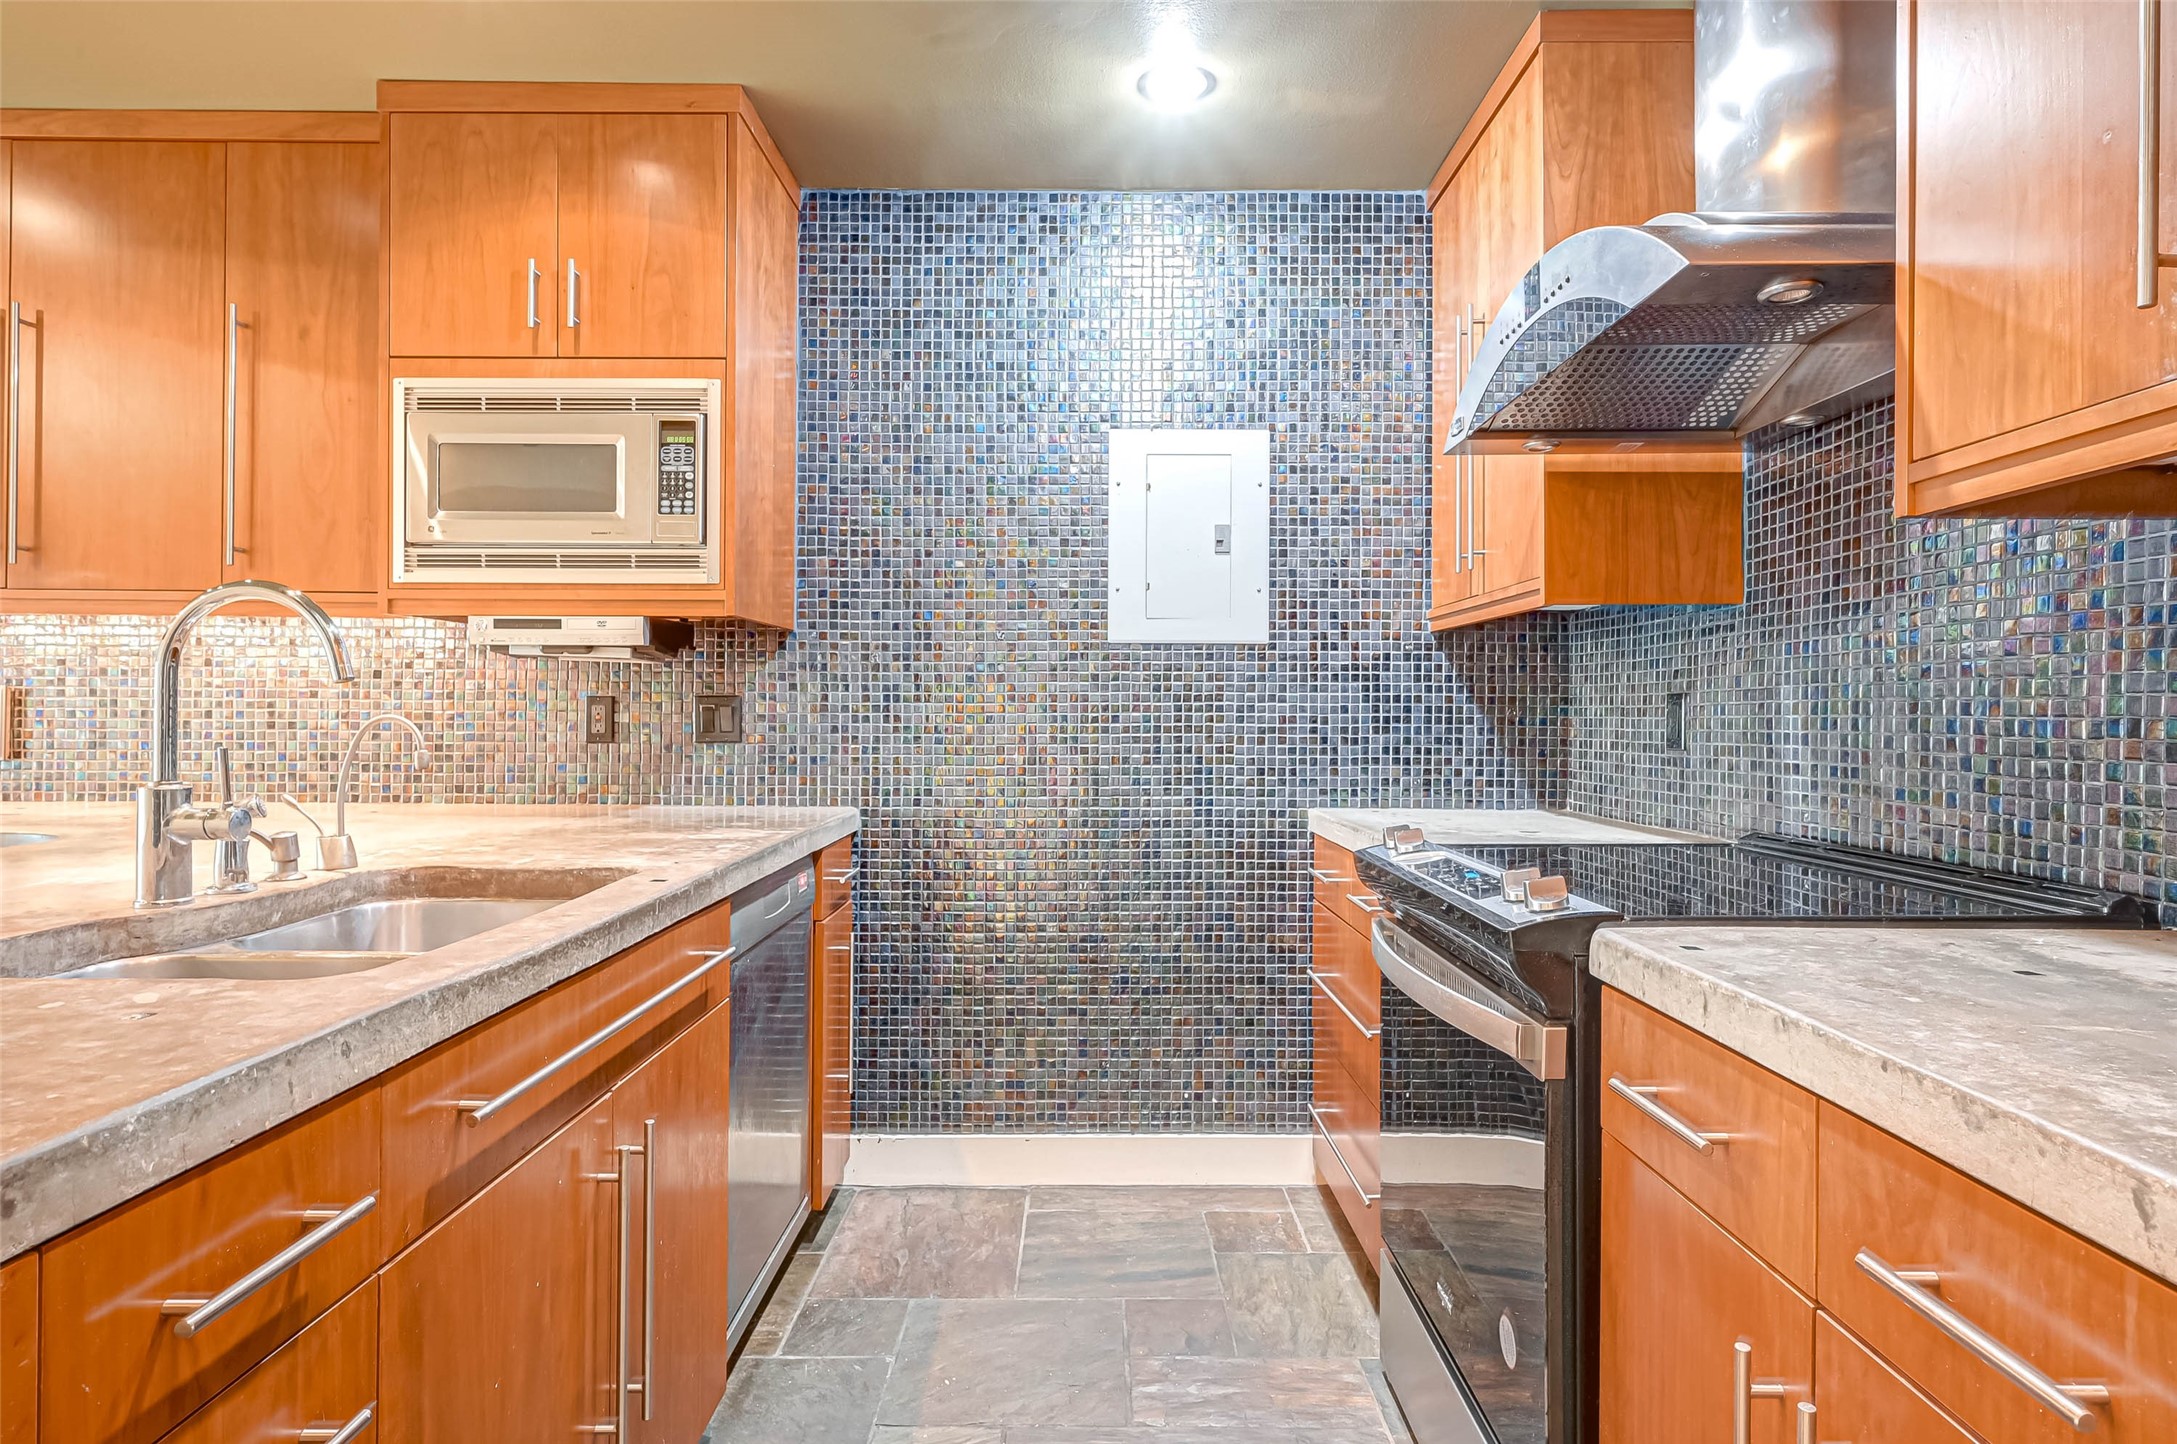 The kitchen features concrete counters, slate flooring, glass tile back splash and wall.  There is a great amount of cabinet storage, pot an pan drawers and wide drawers.